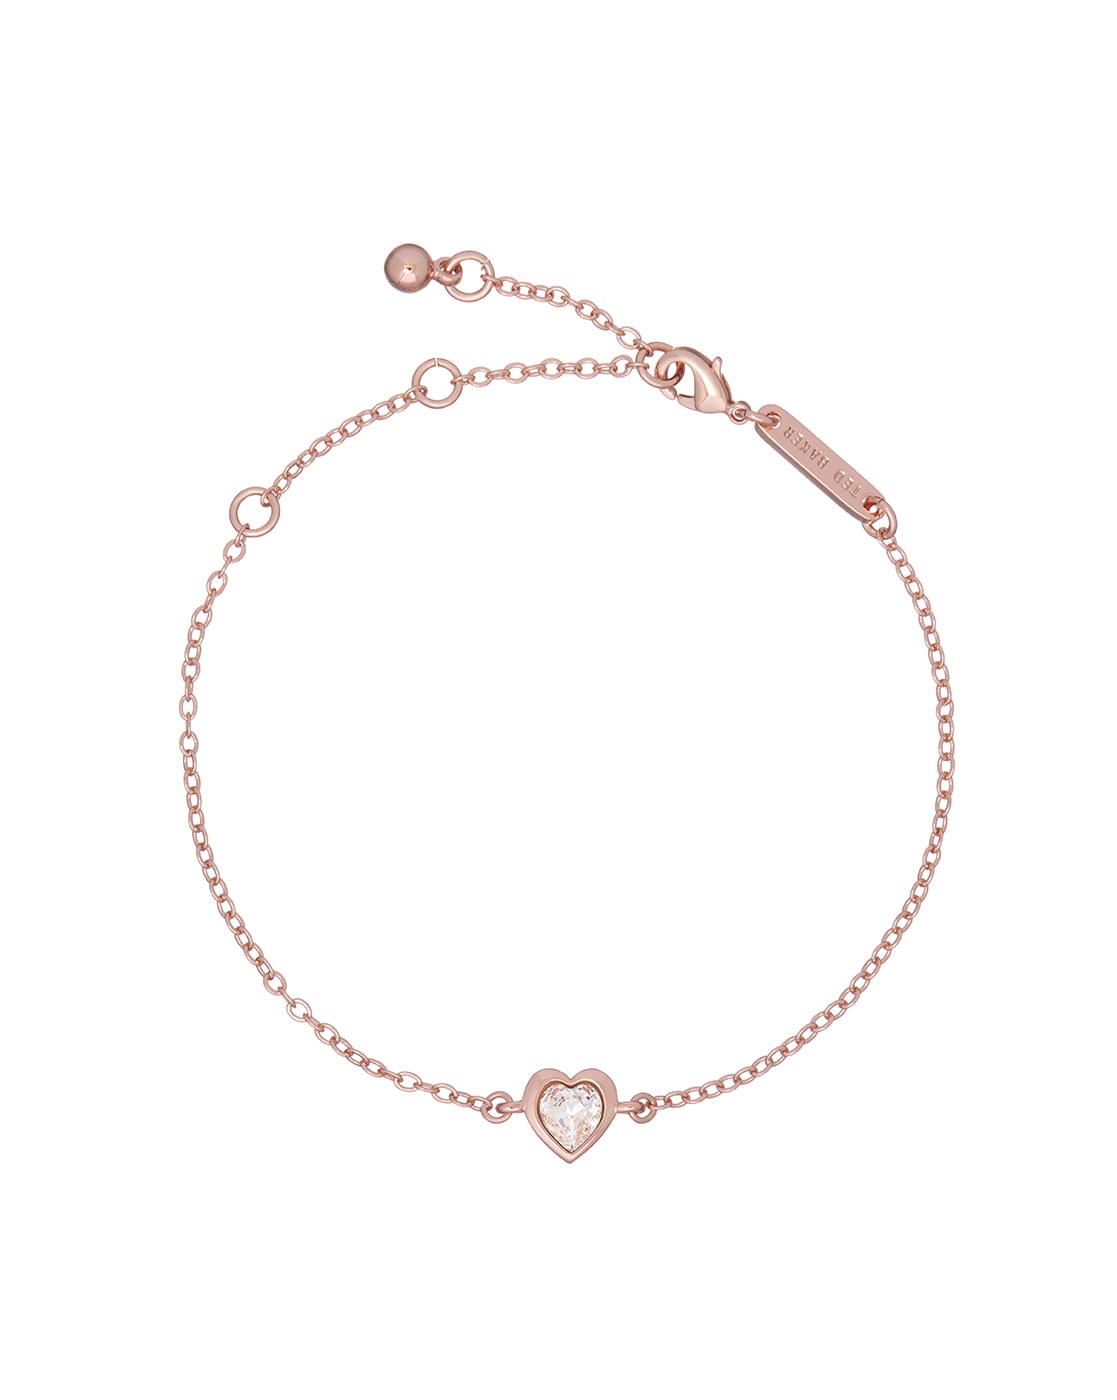 GIVA 925 Sterling Silver Rose Gold Dual Heart Bangle Bracelet Valentines  Gift for Girlfriend, Gifts for Women & Girls| With Certificate of  Authenticity and 925 Stamp | 6 Month Warranty* : Amazon.in: Jewellery